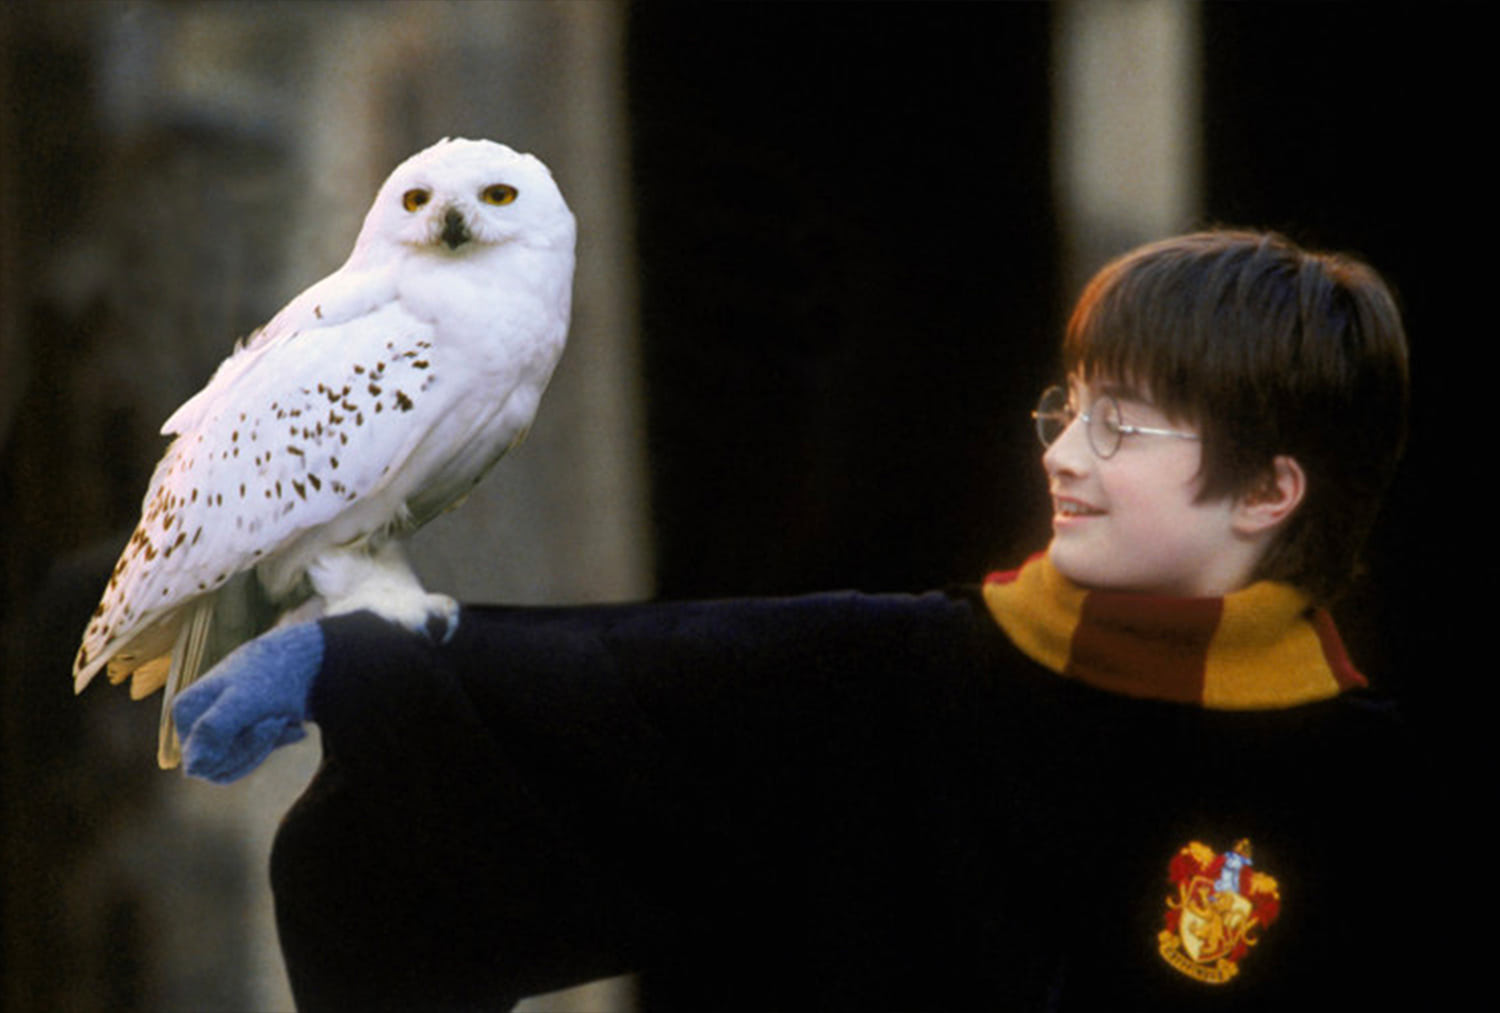 Harry holds Hedwig